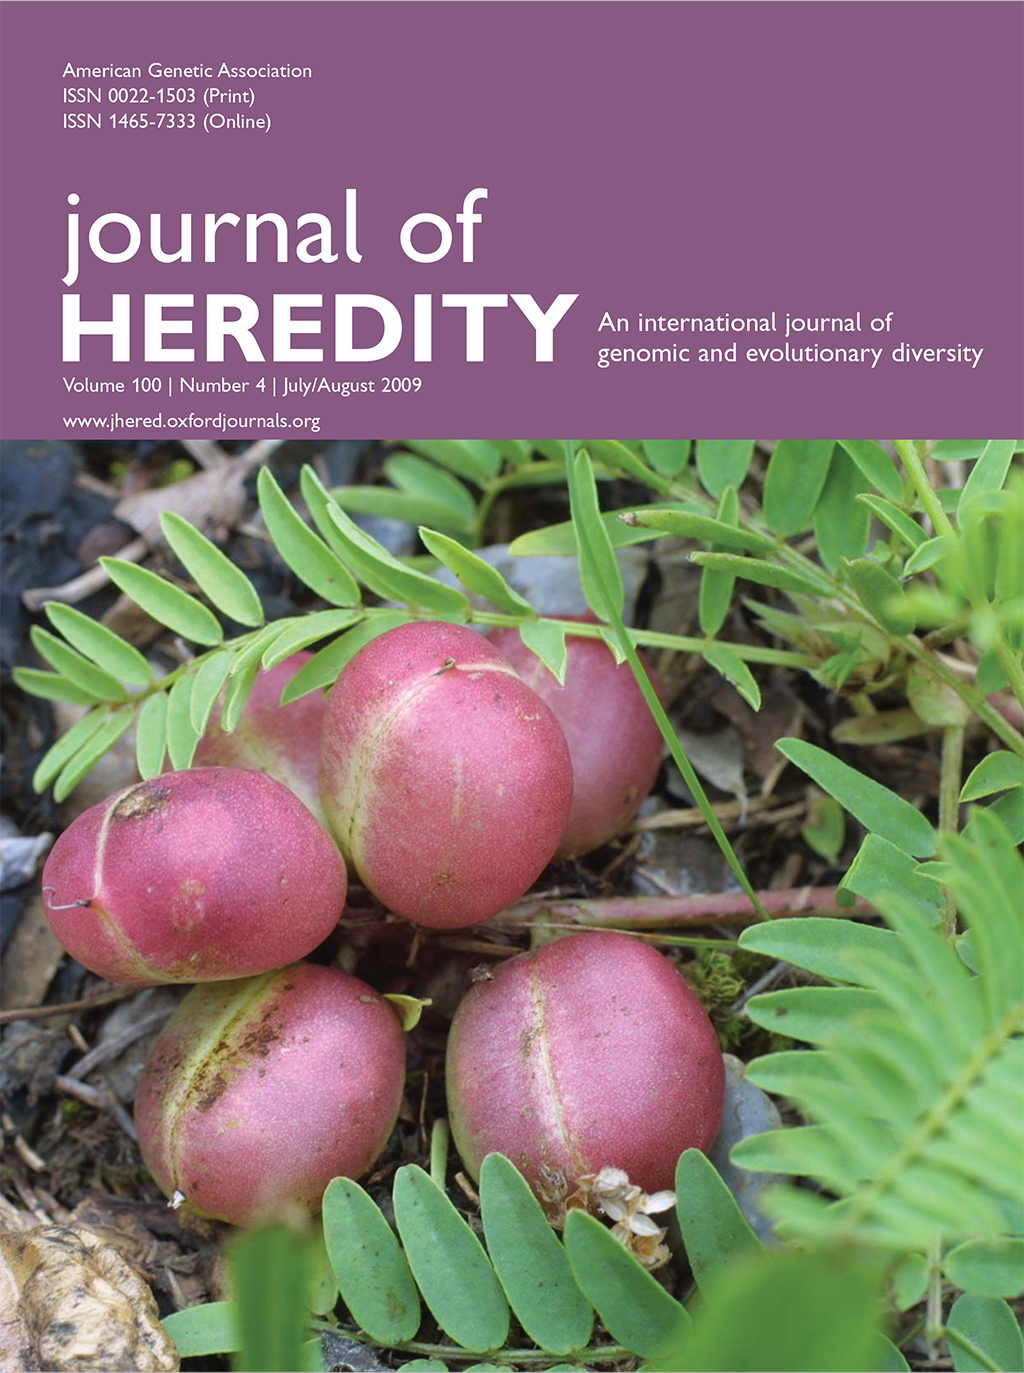 Journal of Heredity, July/August 2009